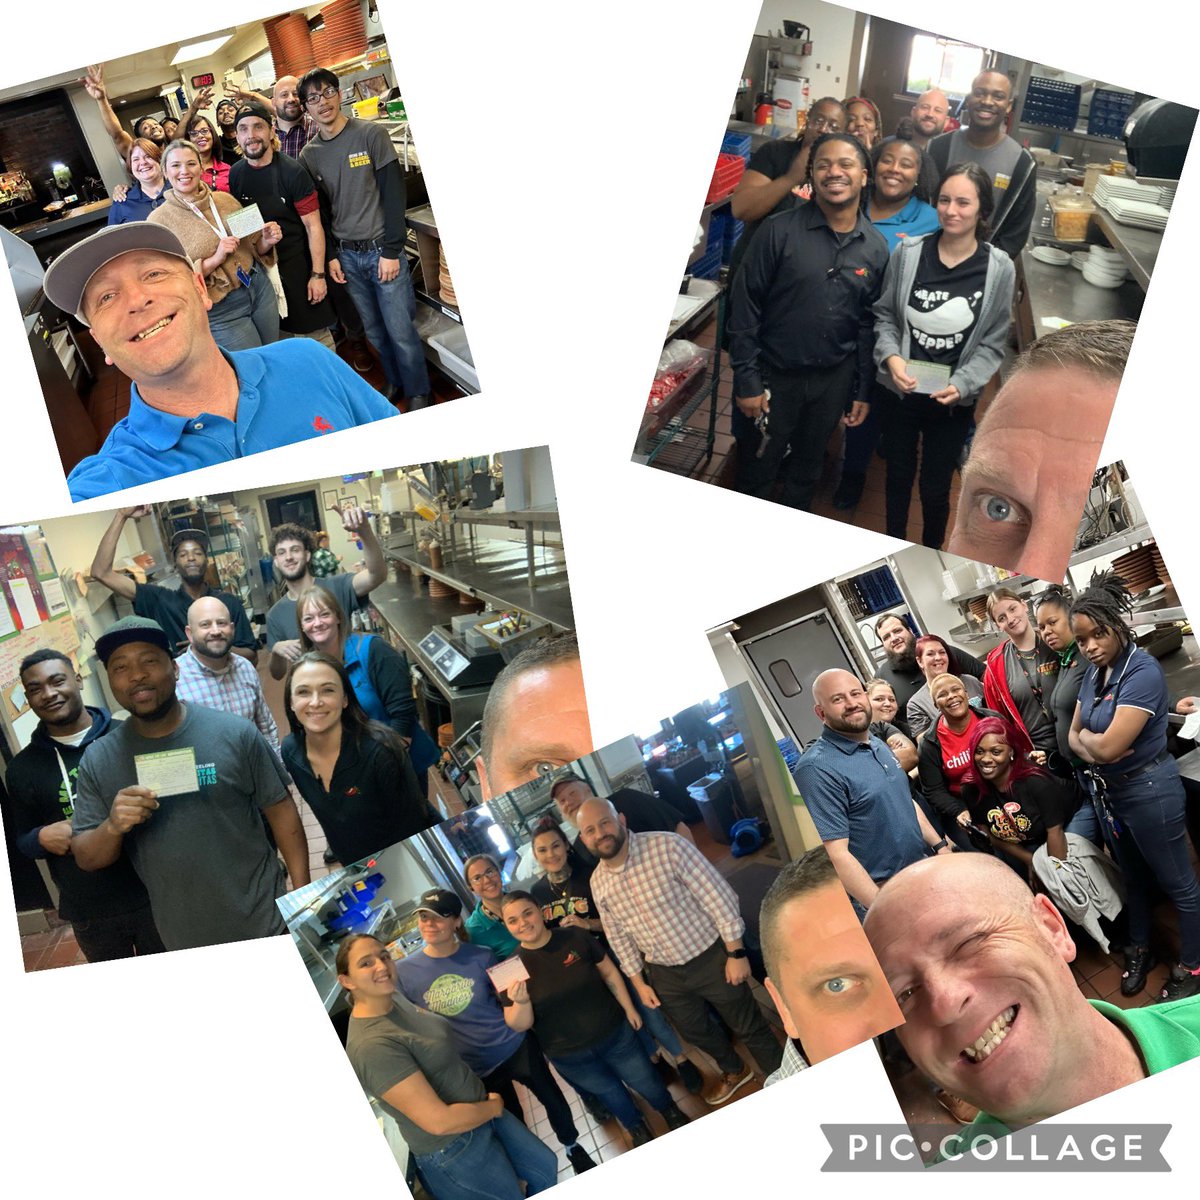 Impactful Week traveling I-10 from Baton Rouge to New Orleans. Looking forward to watching the continued growth and development of these leaders. @chilis in Louisiana building guest traffic and getting 💪 everyday!